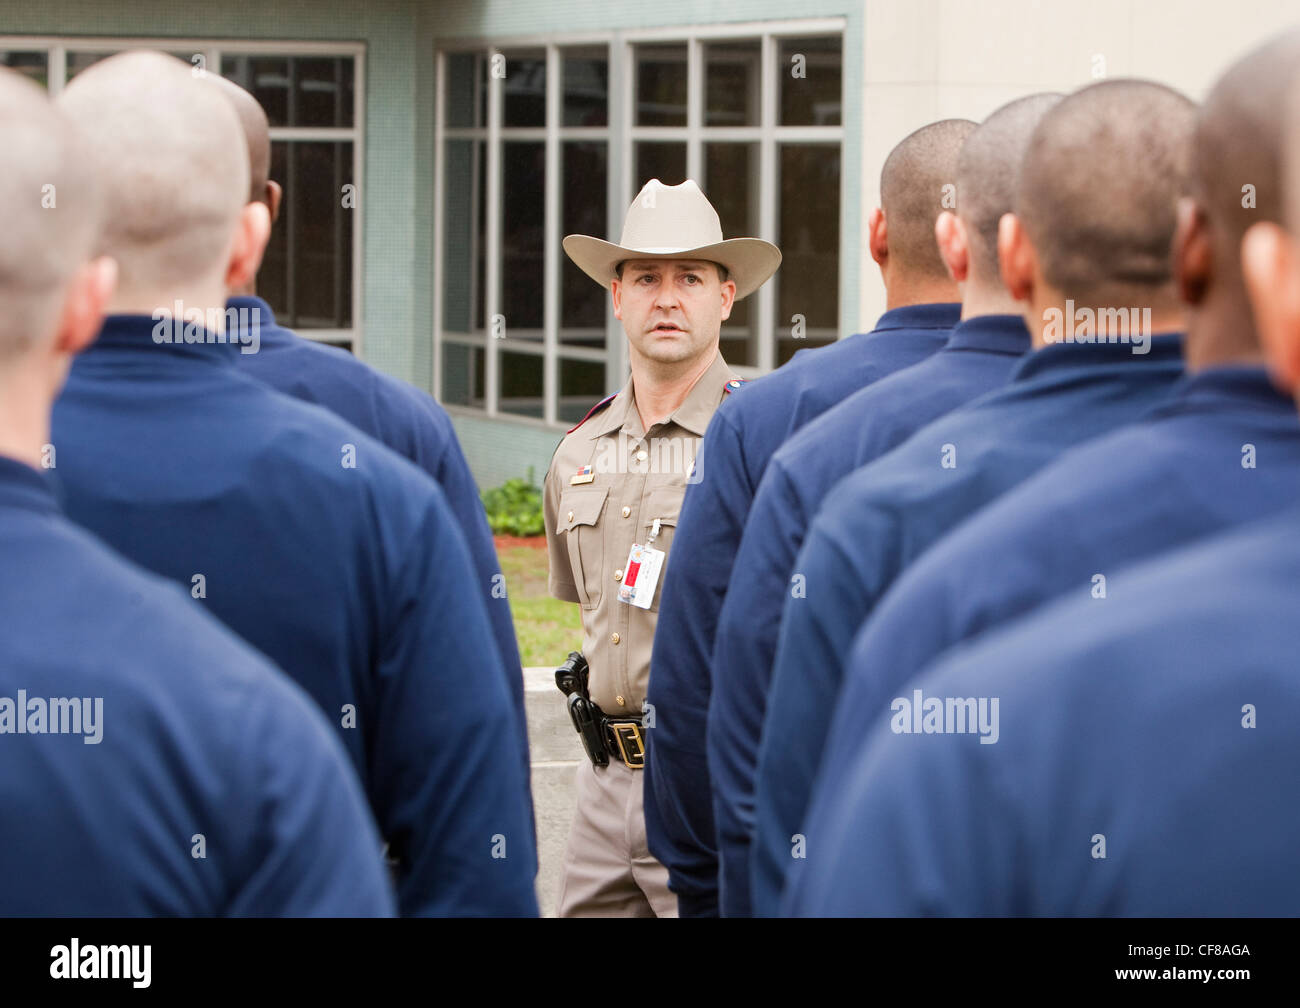 Group of Texas Department of Public Safety agent recruits during training exercise in Austin, Texas Stock Photo